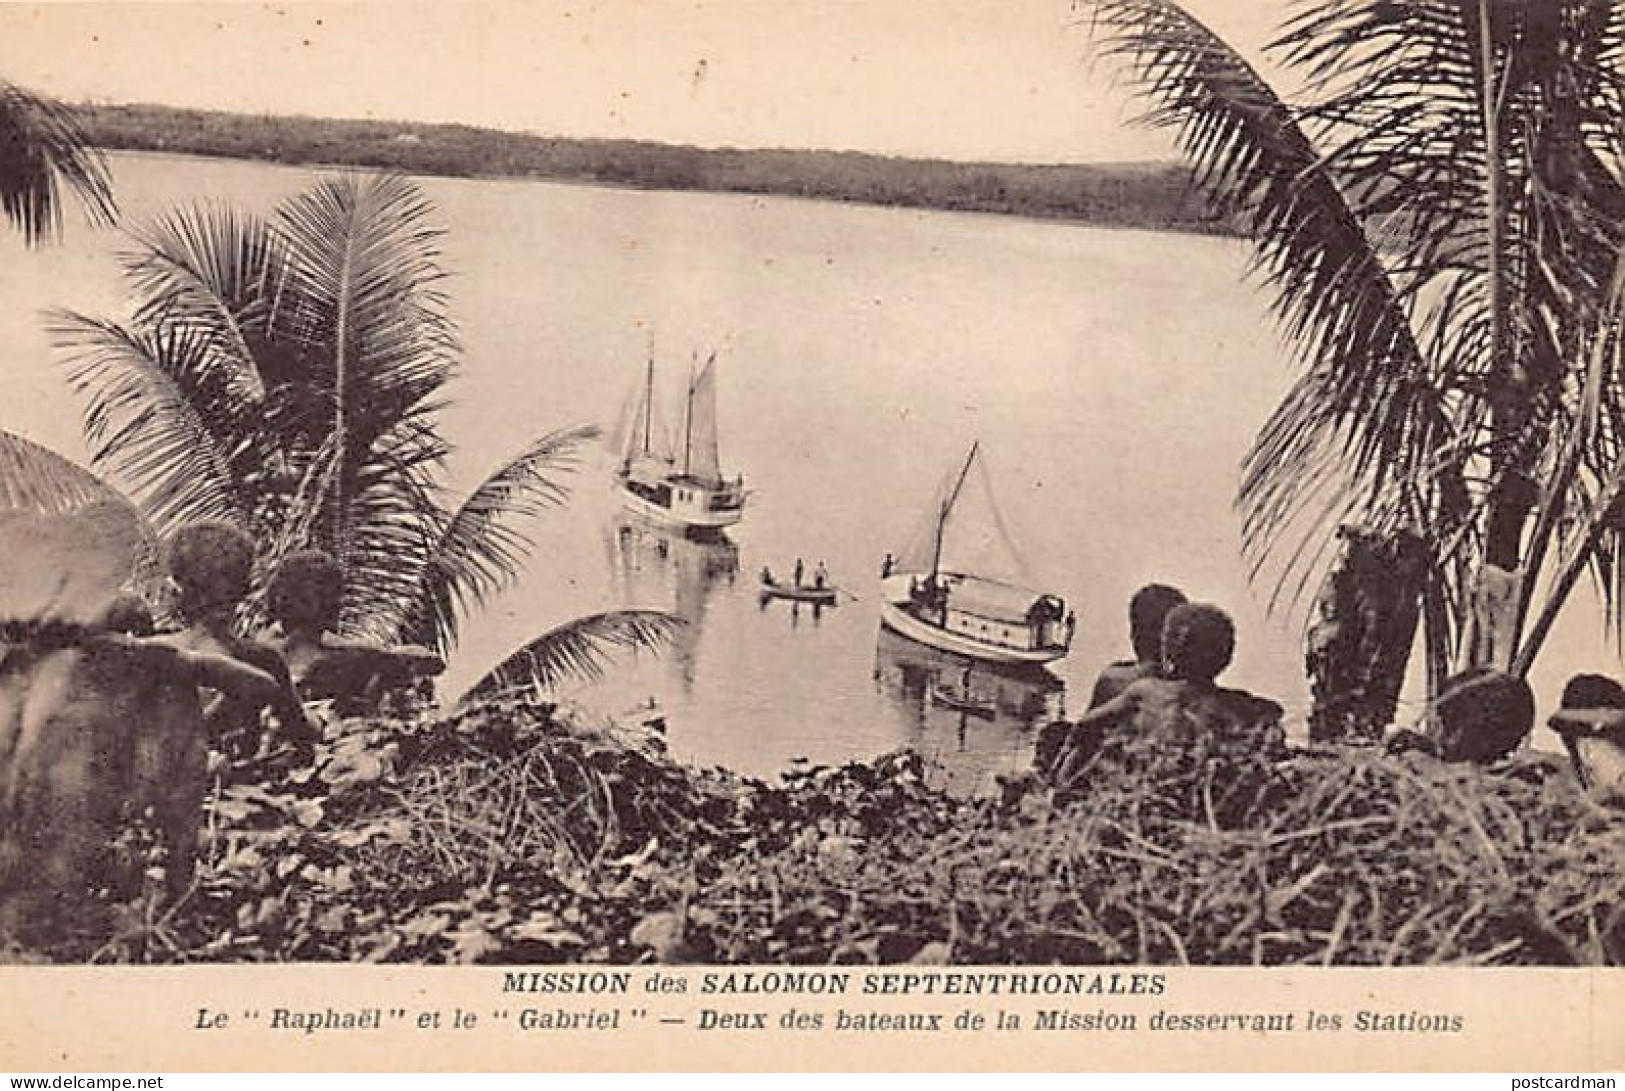 Papua New Guinea - The Raphaël And The Gabriel, Two Of The Mission's Boats Serving The Stations - Publ. Mission Des Salo - Papua New Guinea